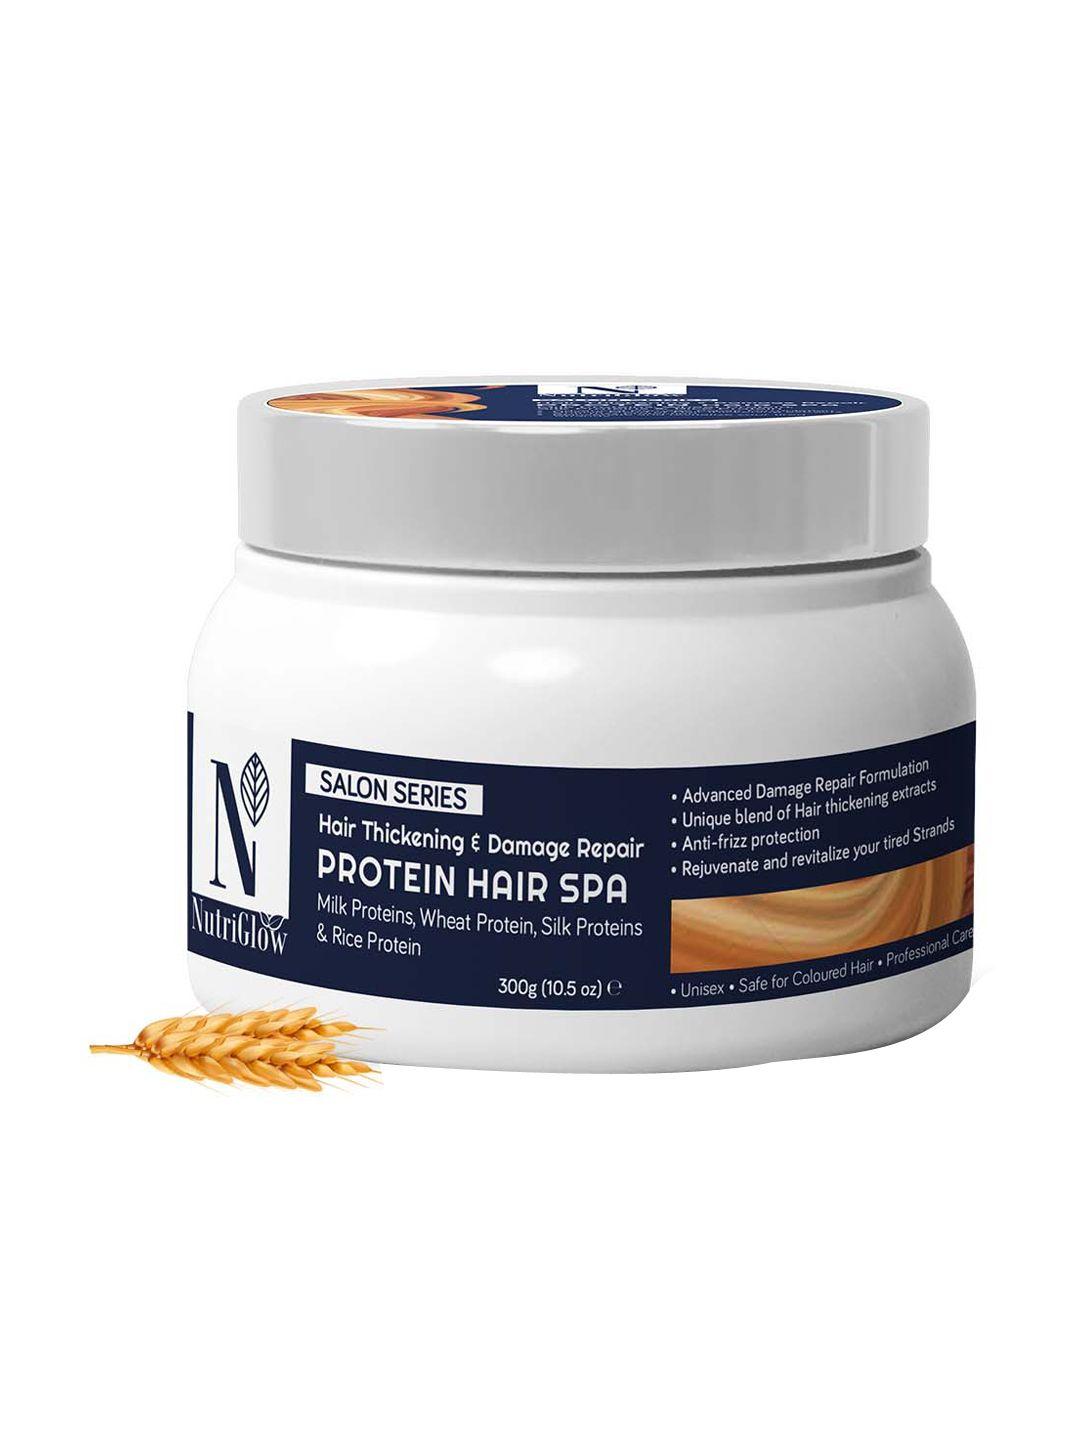 nutriglow protein hair spa with rice proteins for hair thickening & damage repair - 300gm